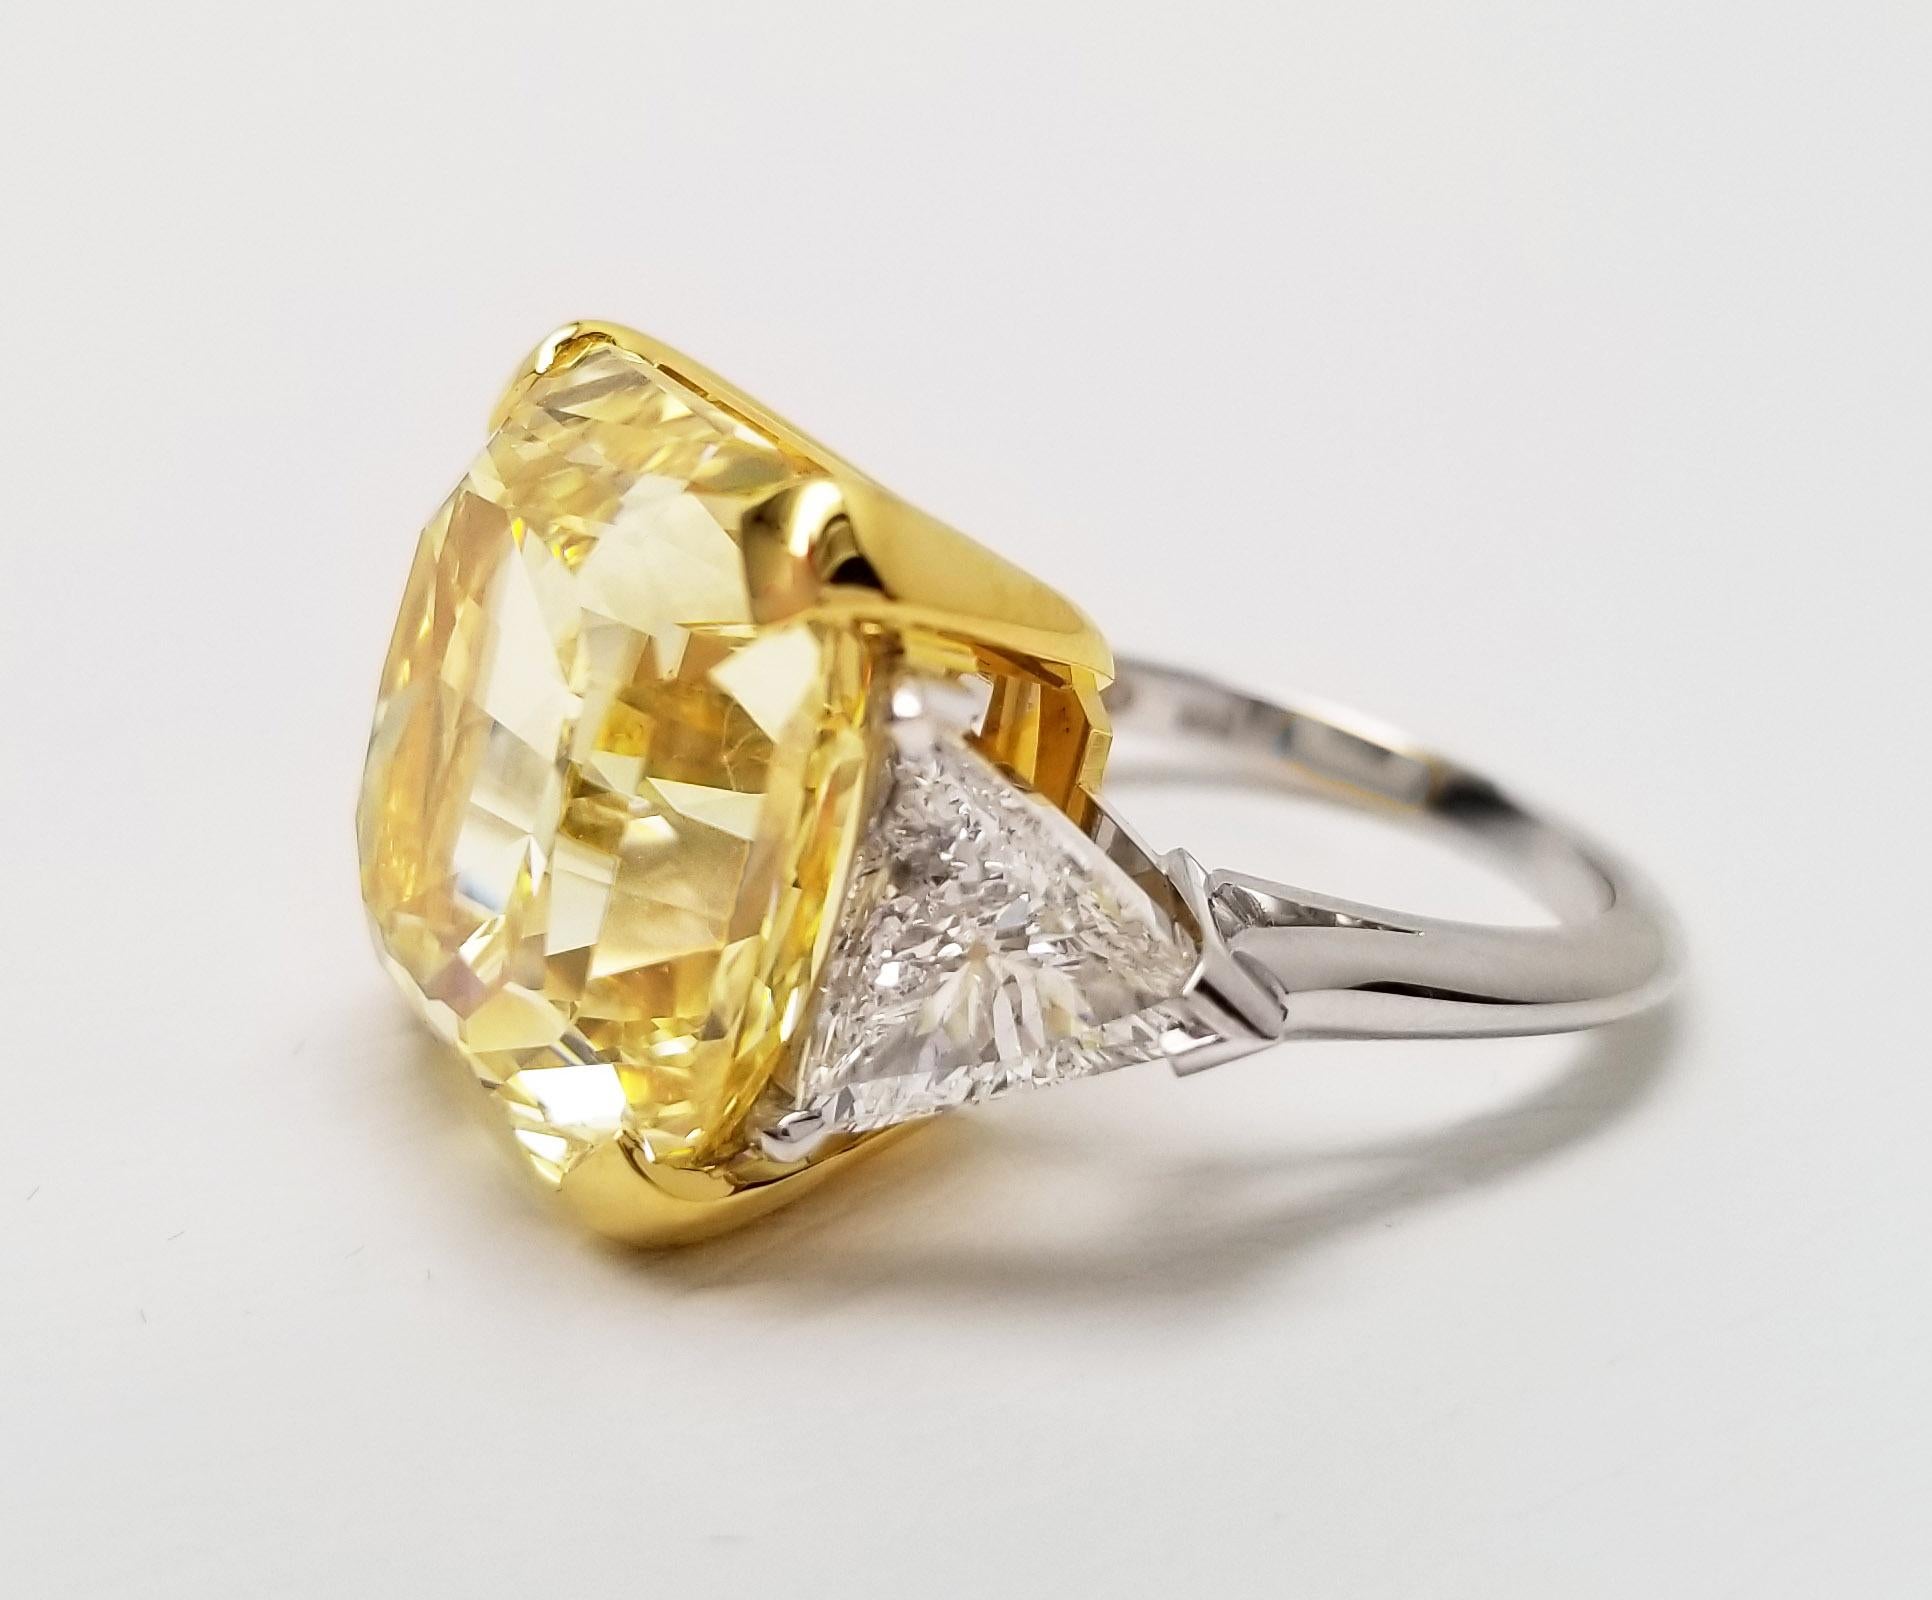 A GIA certified, internally flawless intense yellow diamond with excellent symmetry and no fluorescence from Scarselli. Set between two trilliant cut white diamond side stones on a white gold band.

Bigger is better – perfectly exemplified in this